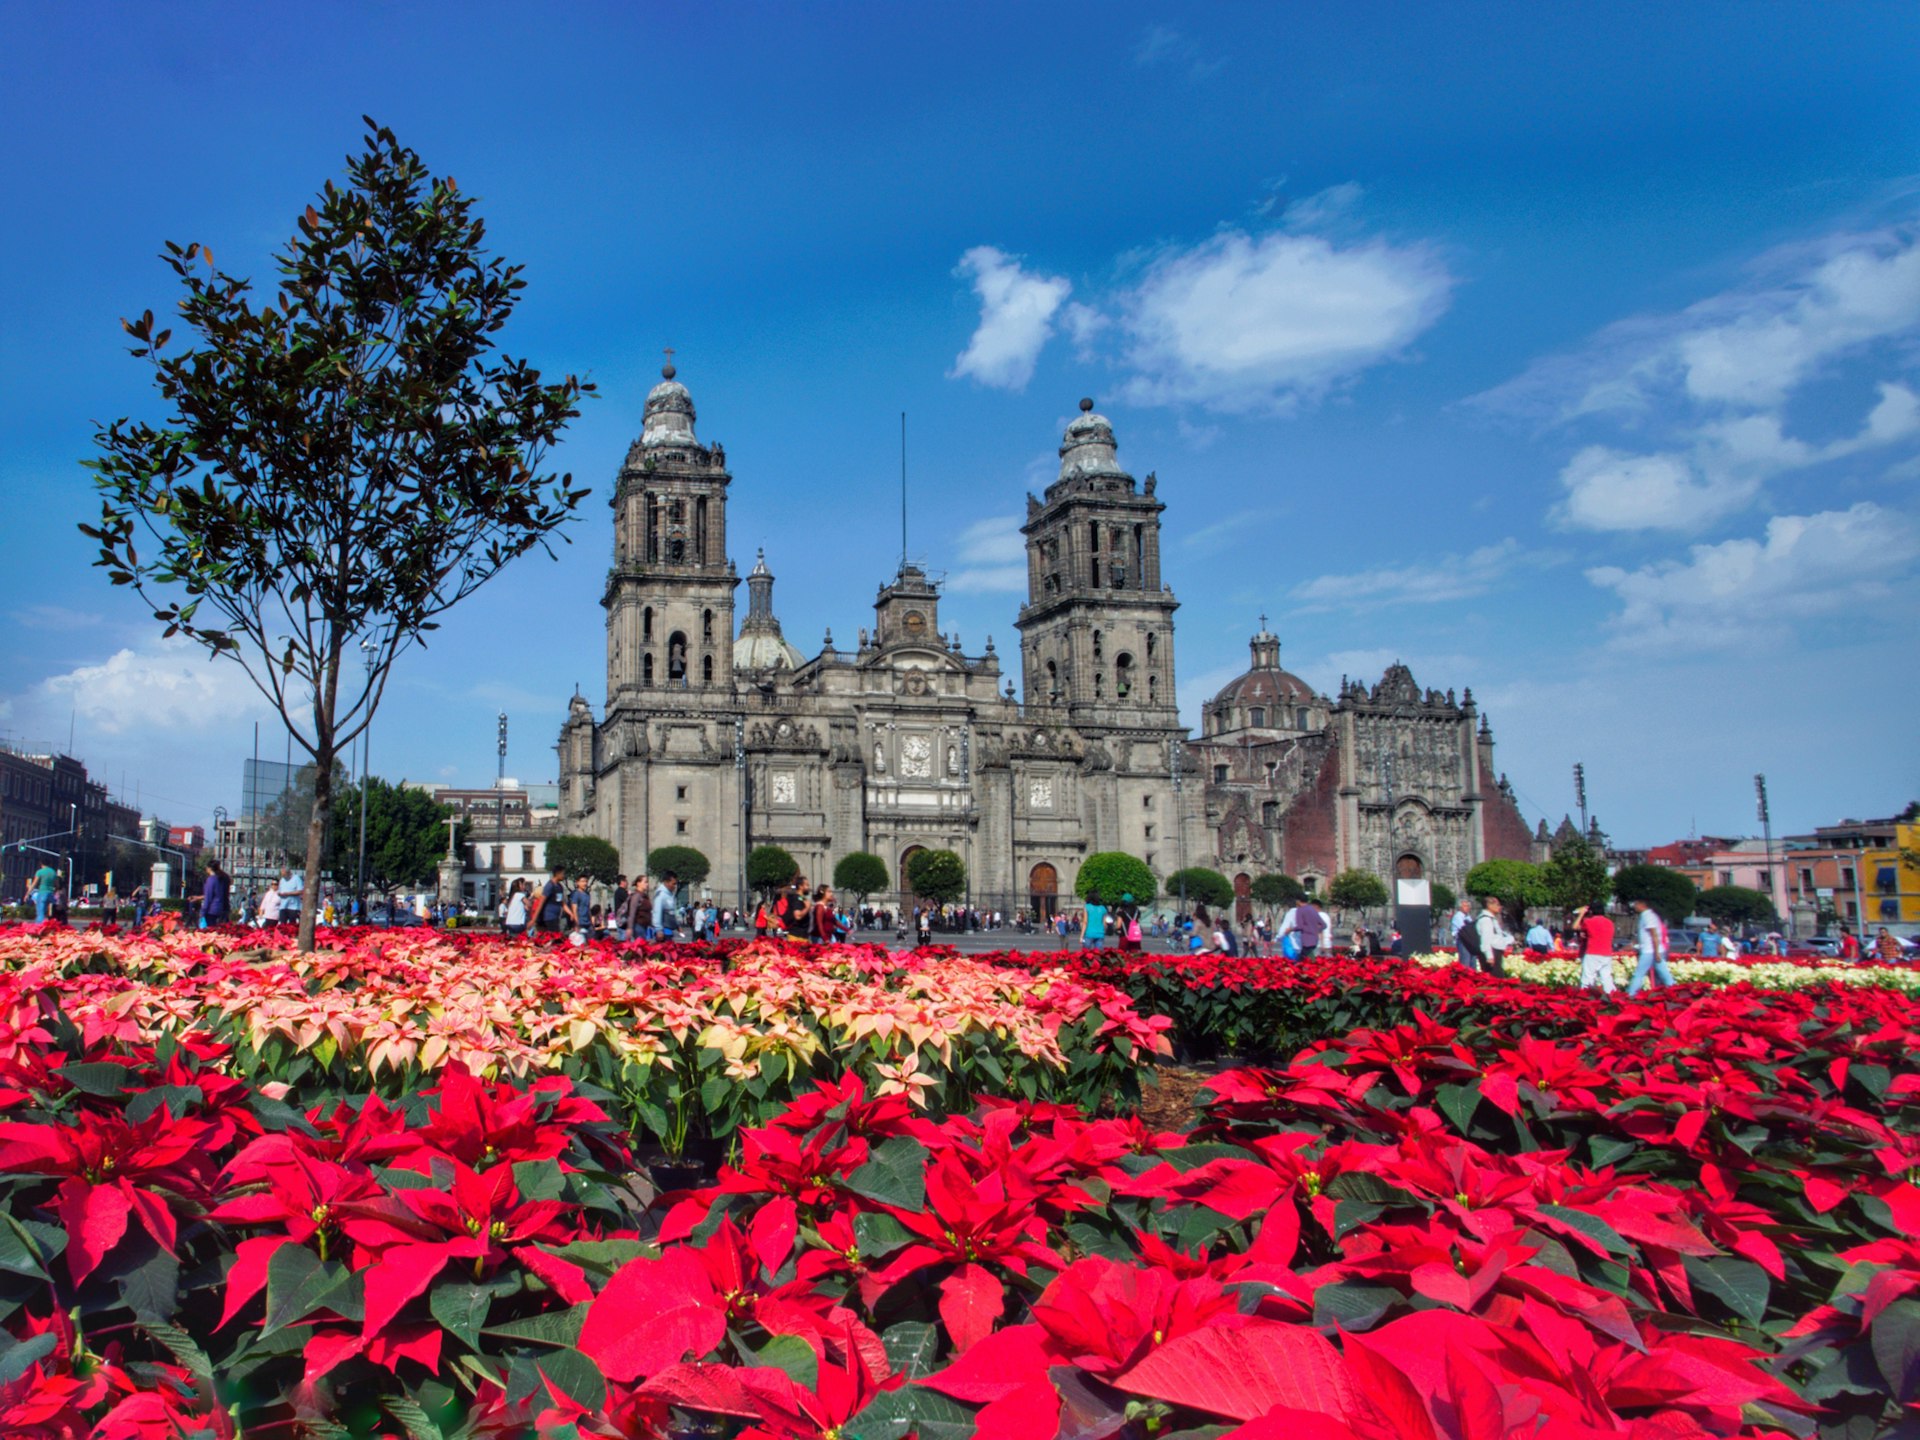 Christmastime in Mexico City with colorful poinsettias displayed outside the city's major church